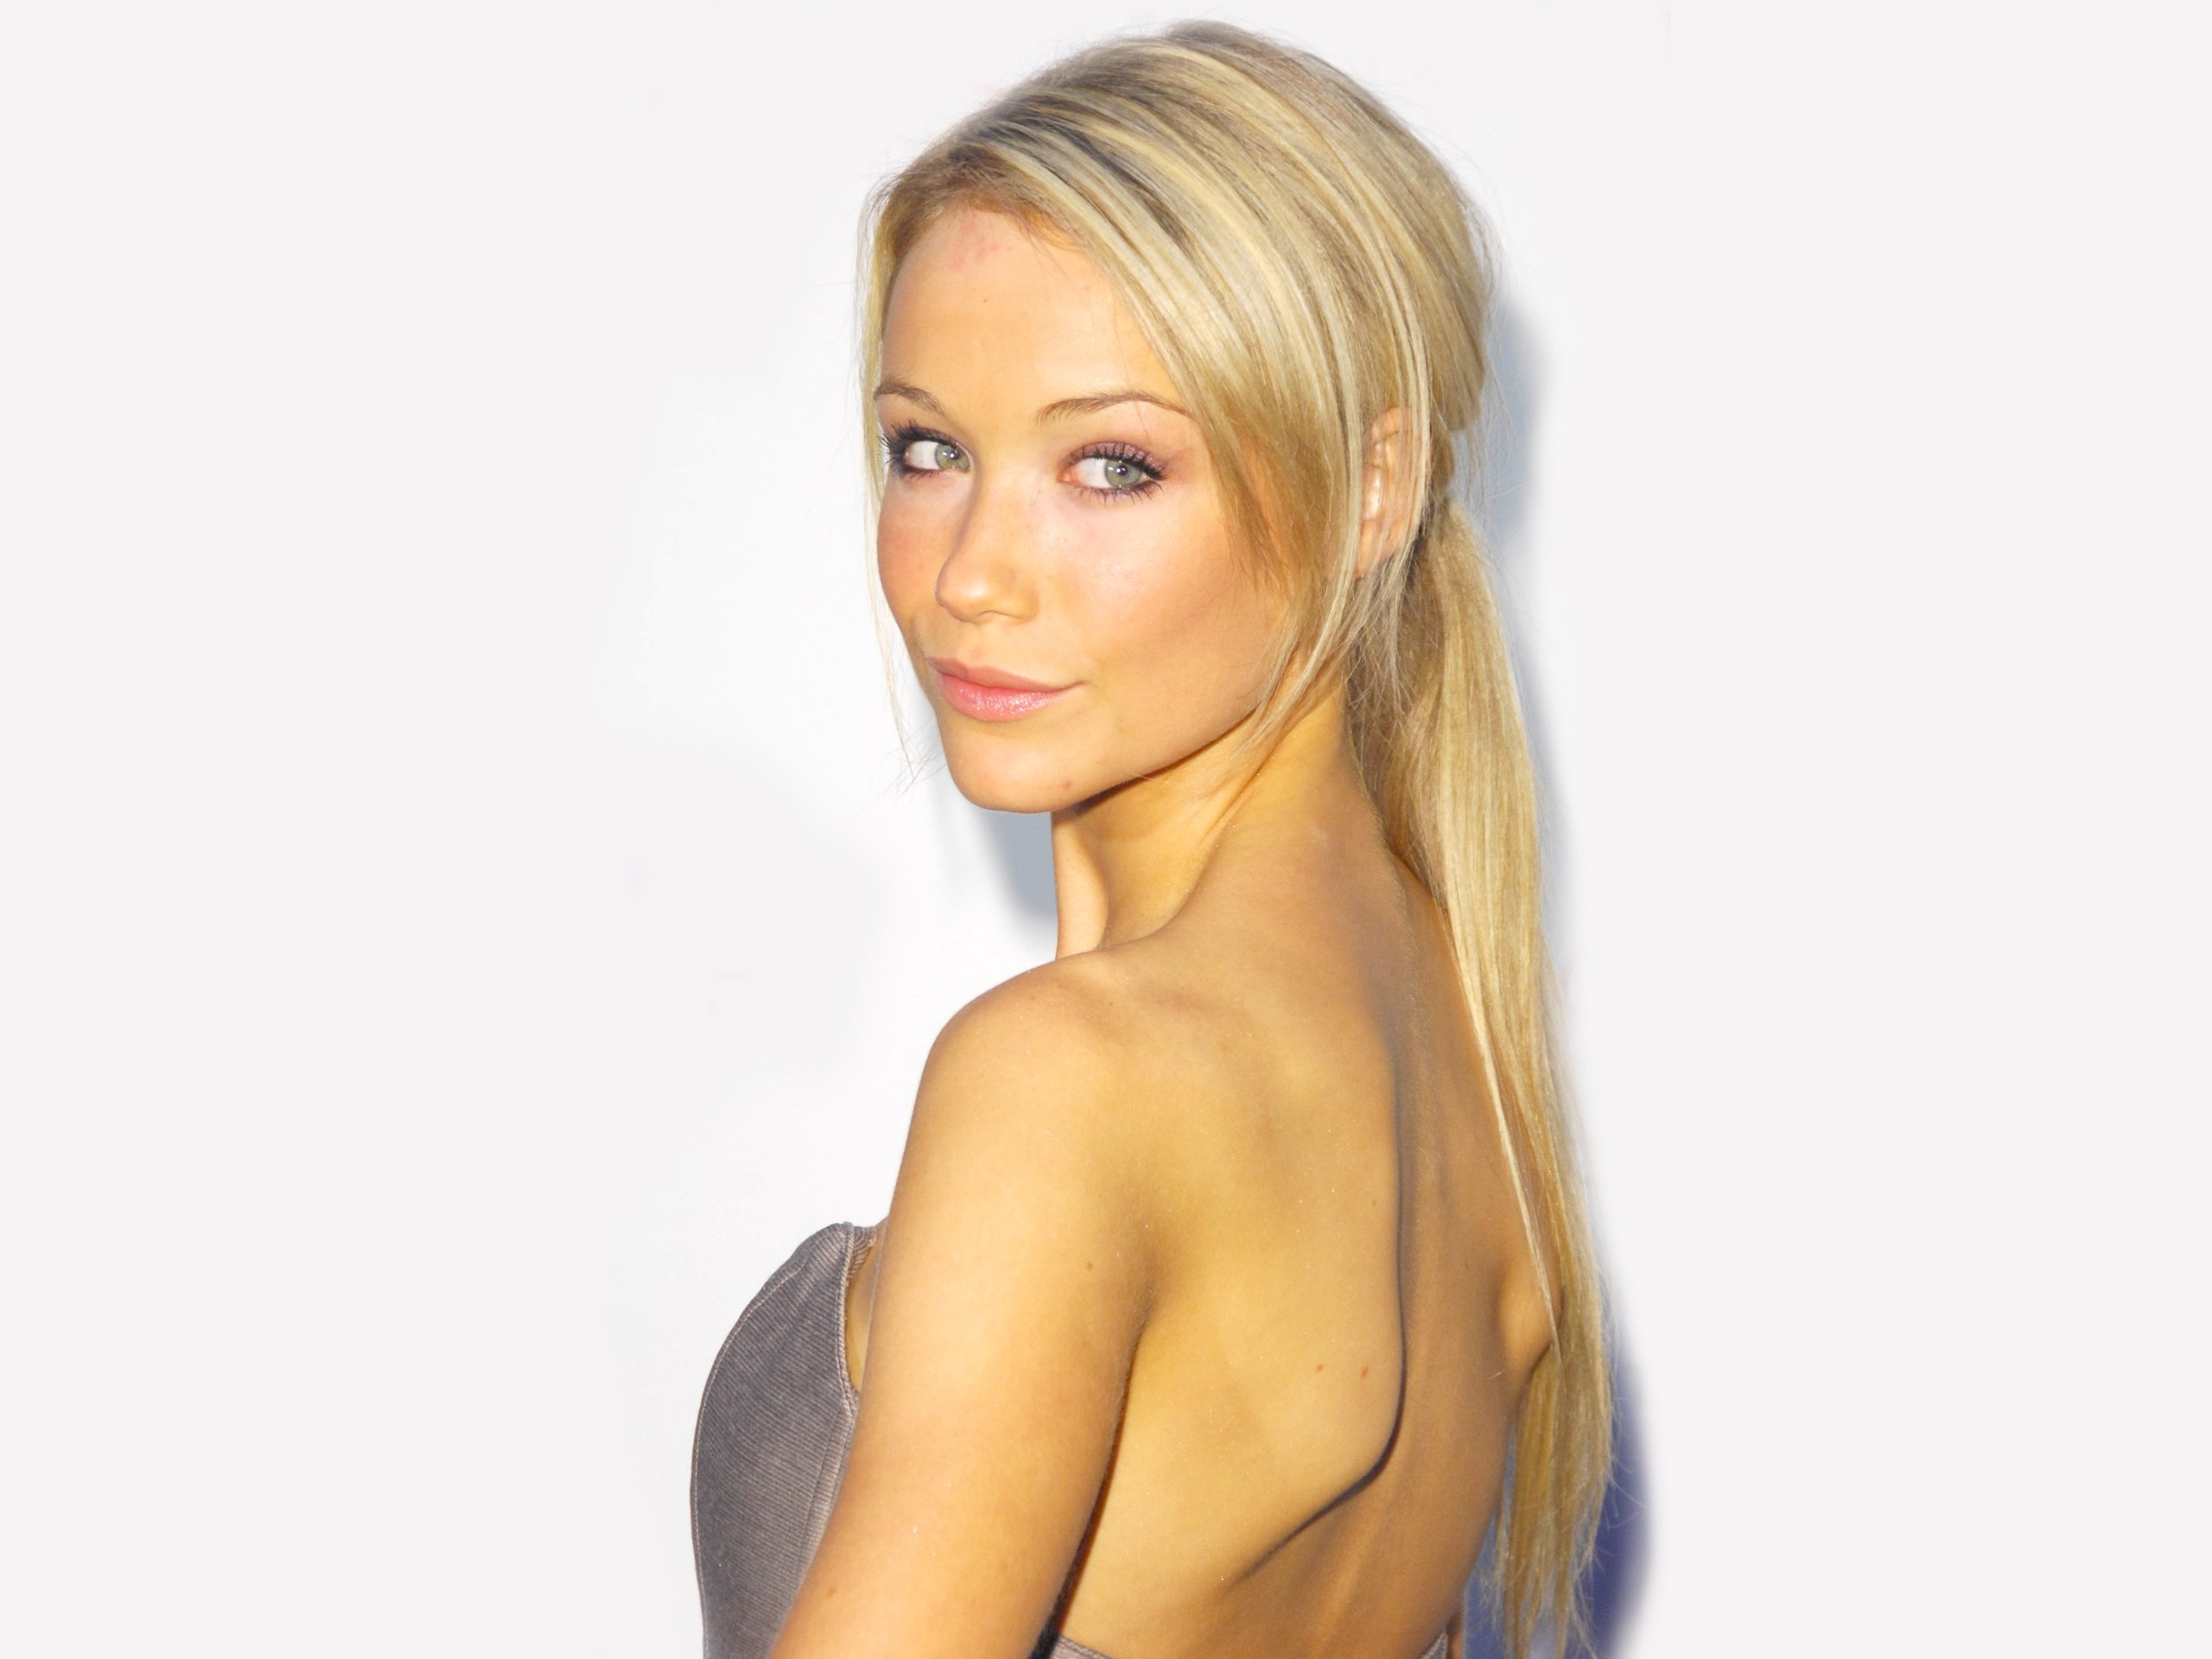 People 2560x1920 women blonde green eyes Katrina Bowden actress simple background white background looking over shoulder